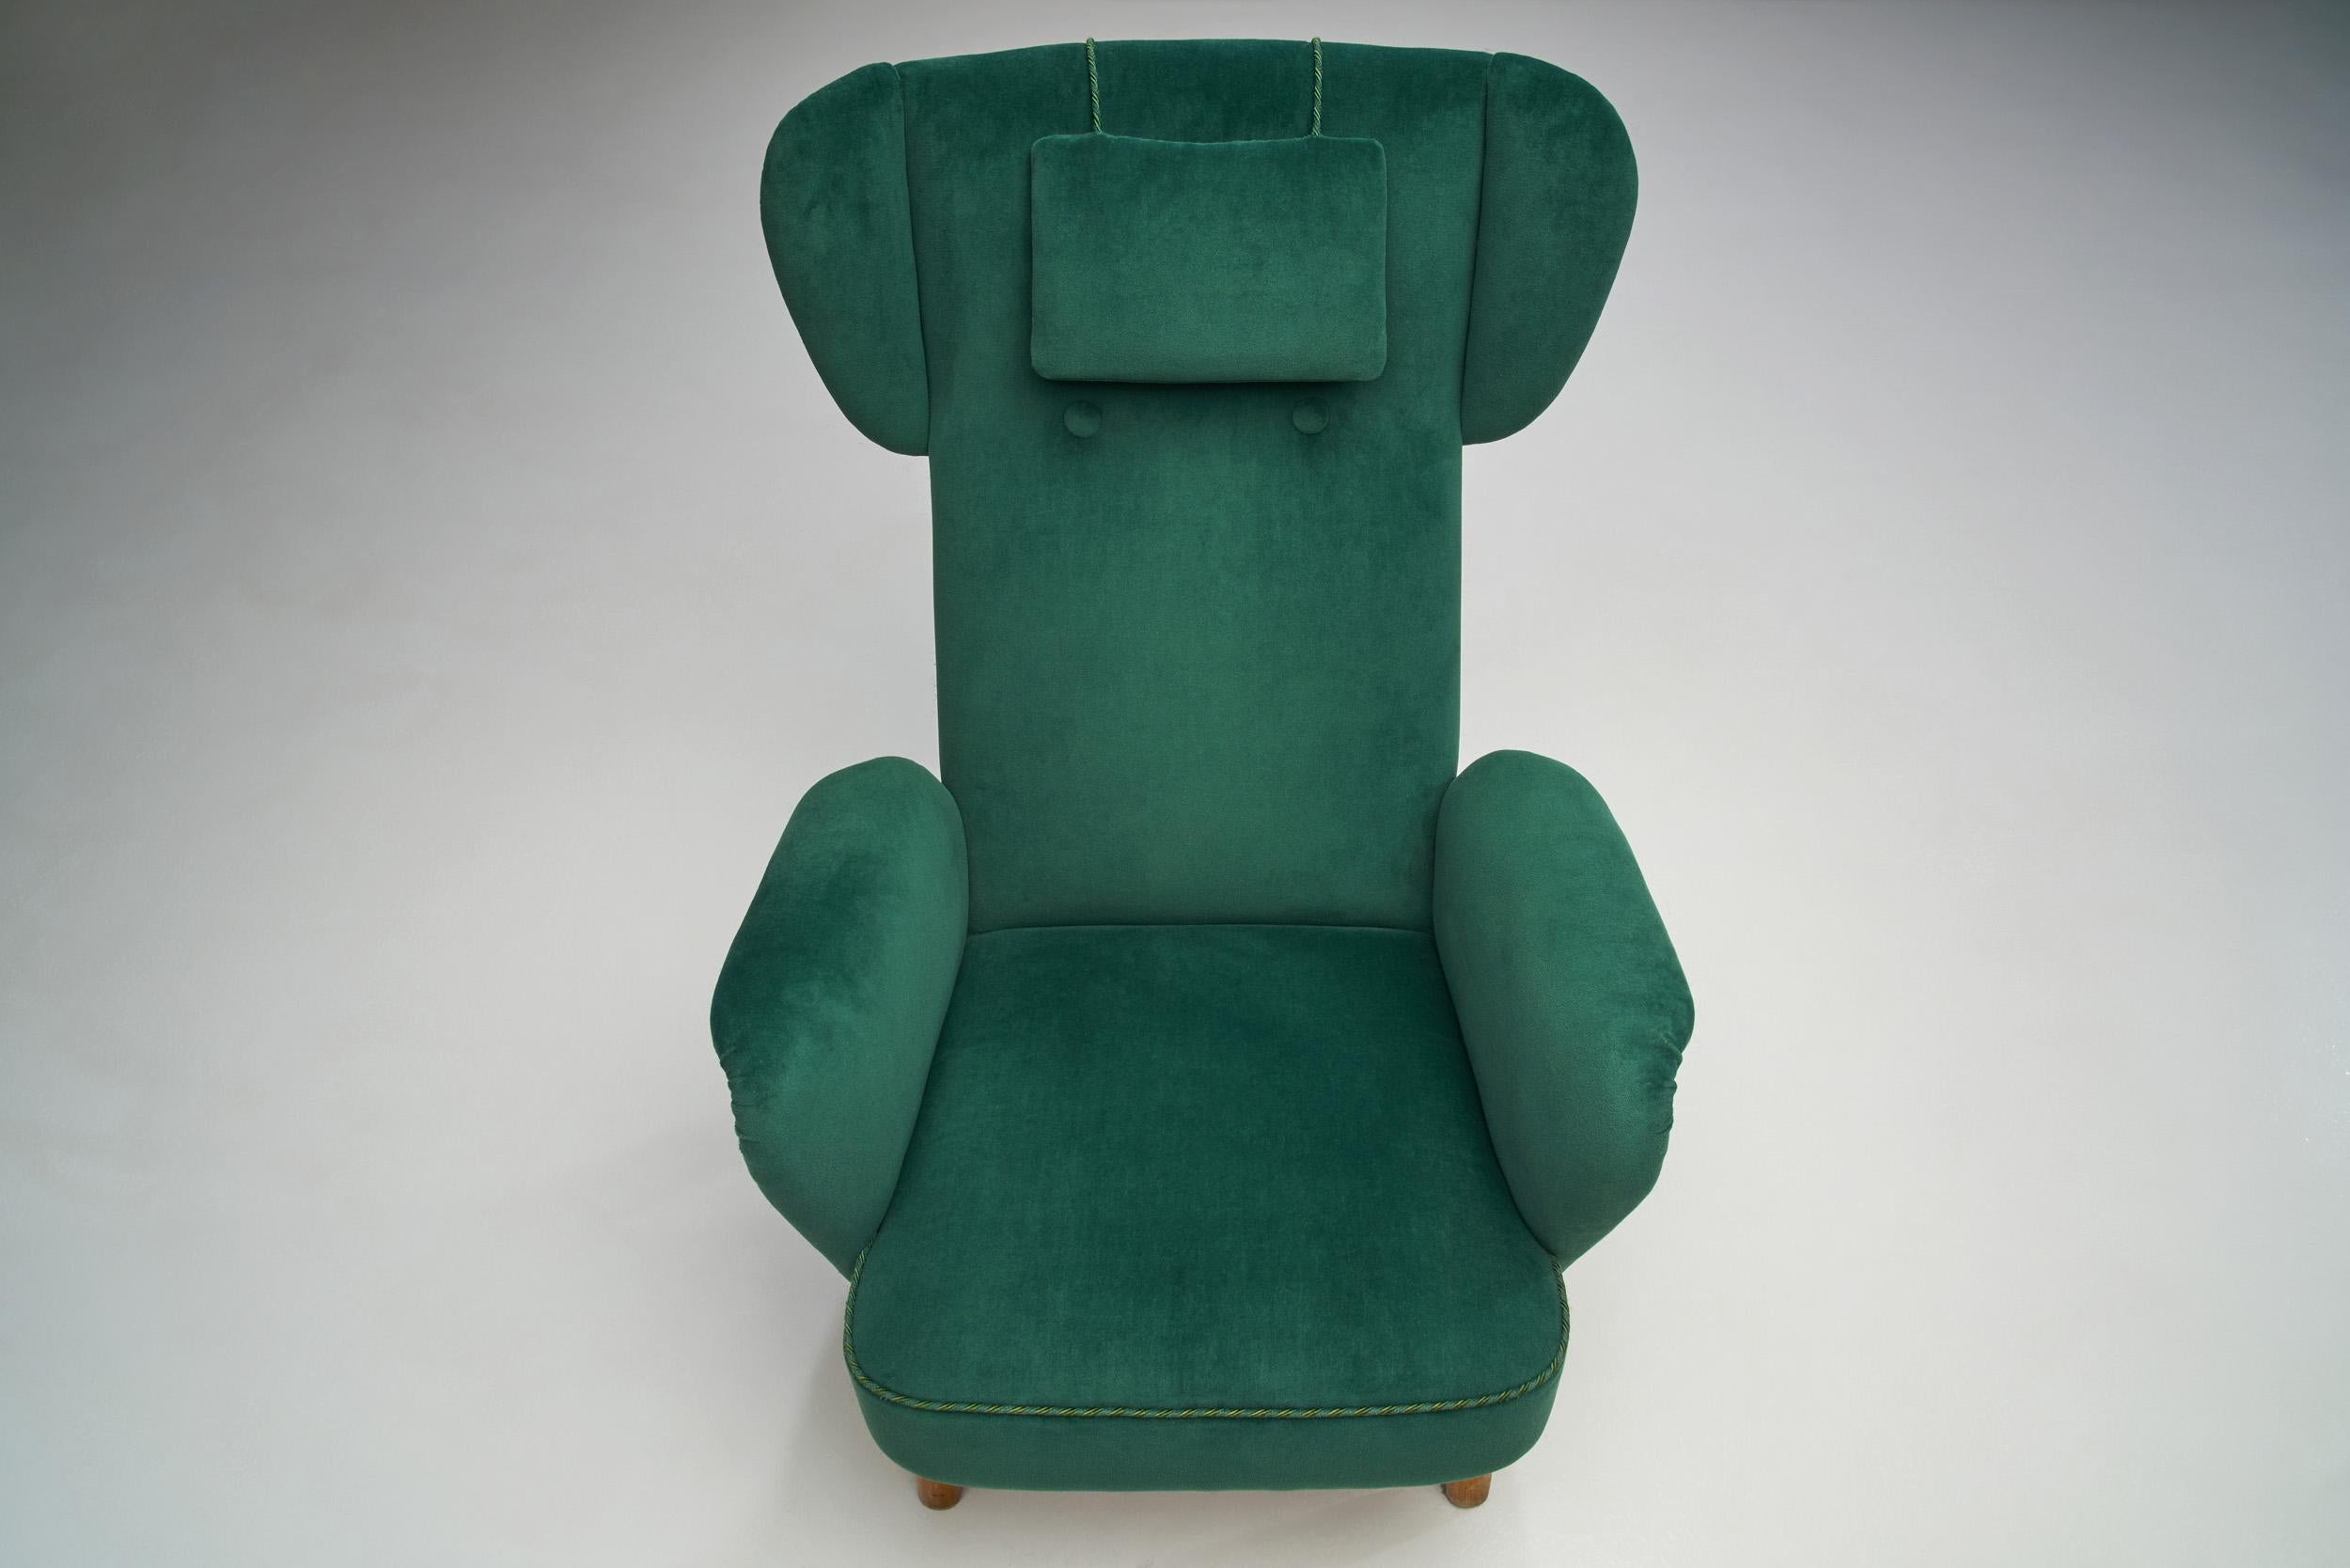 Mid-20th Century Carl Gustaf Hiort Af Ornäs Armchair for Hiort Tuote Puunveisto, Finland Mid-1940 For Sale